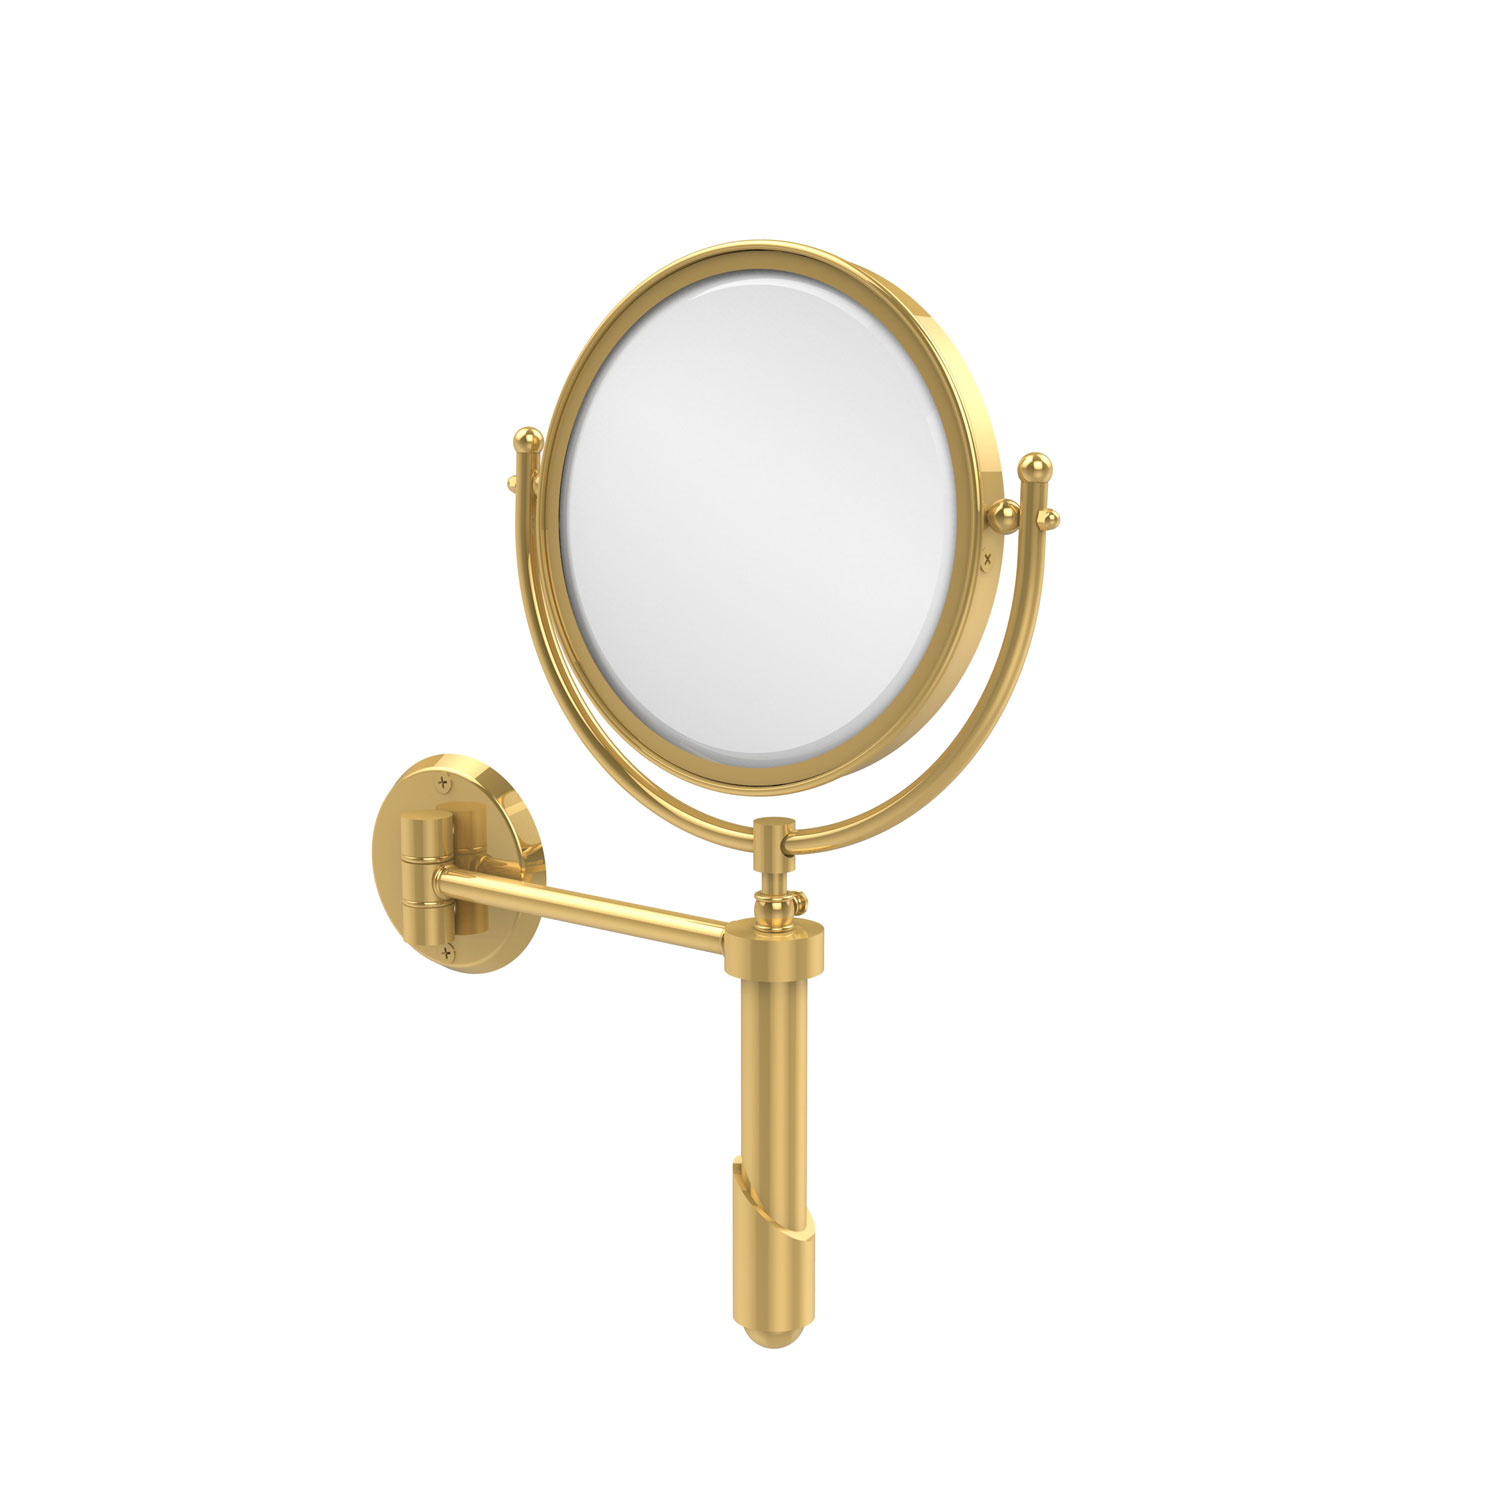 Soho Collection Wall Mounted Make-Up Mirror 8 Inch Diameter With 4X Magnification, Polished Brass